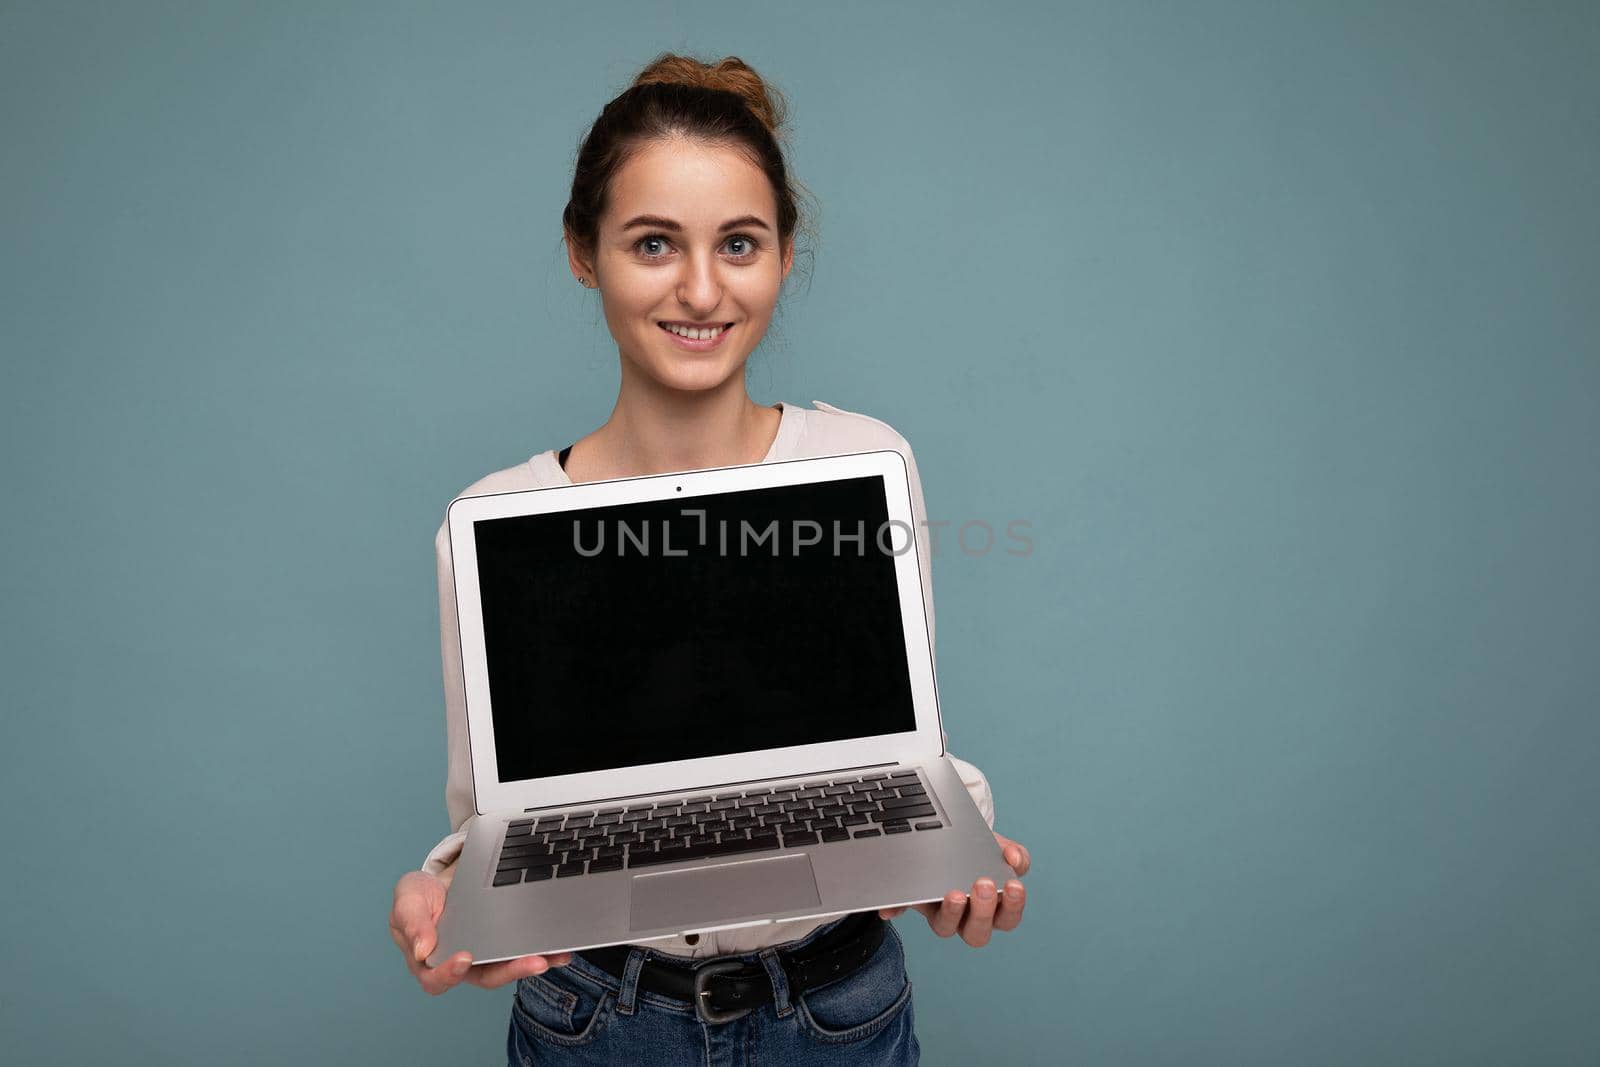 Beautiful smiling young woman holding netbook computer looking at camera wearing white shirt isolated on blue background by TRMK